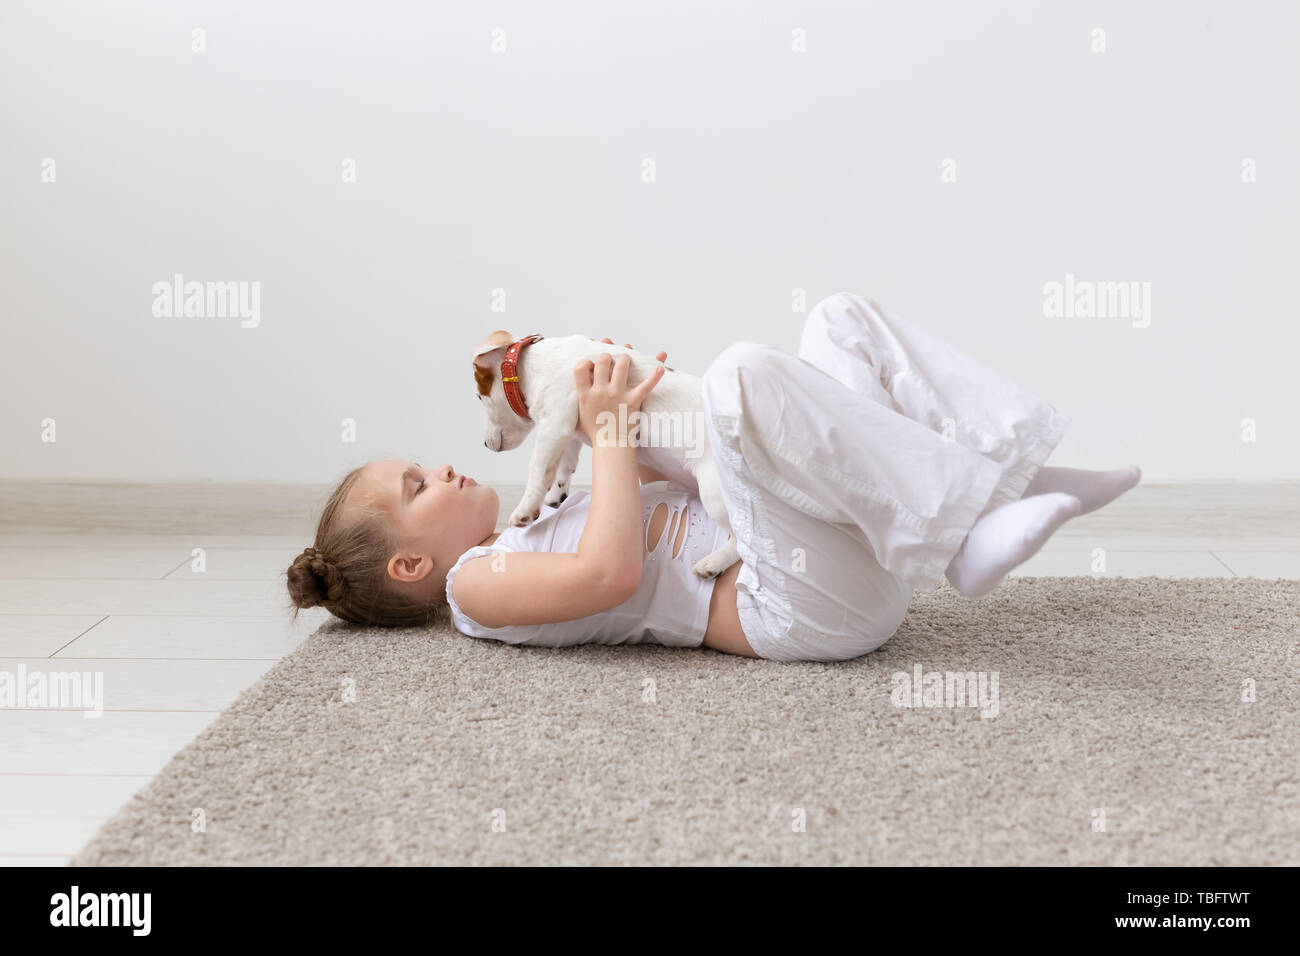 People Children And Pets Concept Little Kid Girl Lying On The